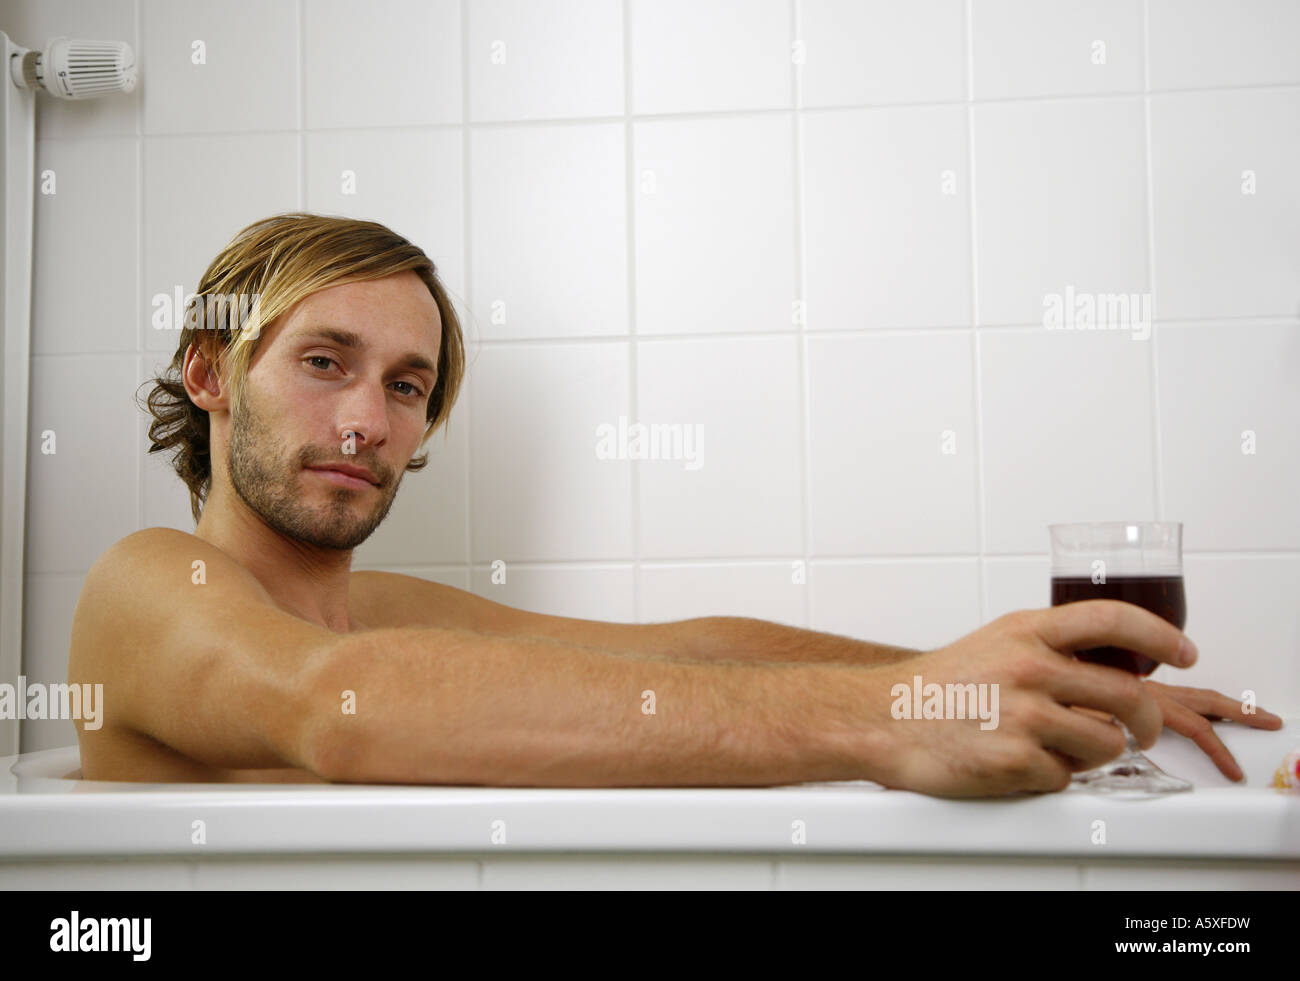 Young man leaning en baignoire holding wine glass close up Banque D'Images